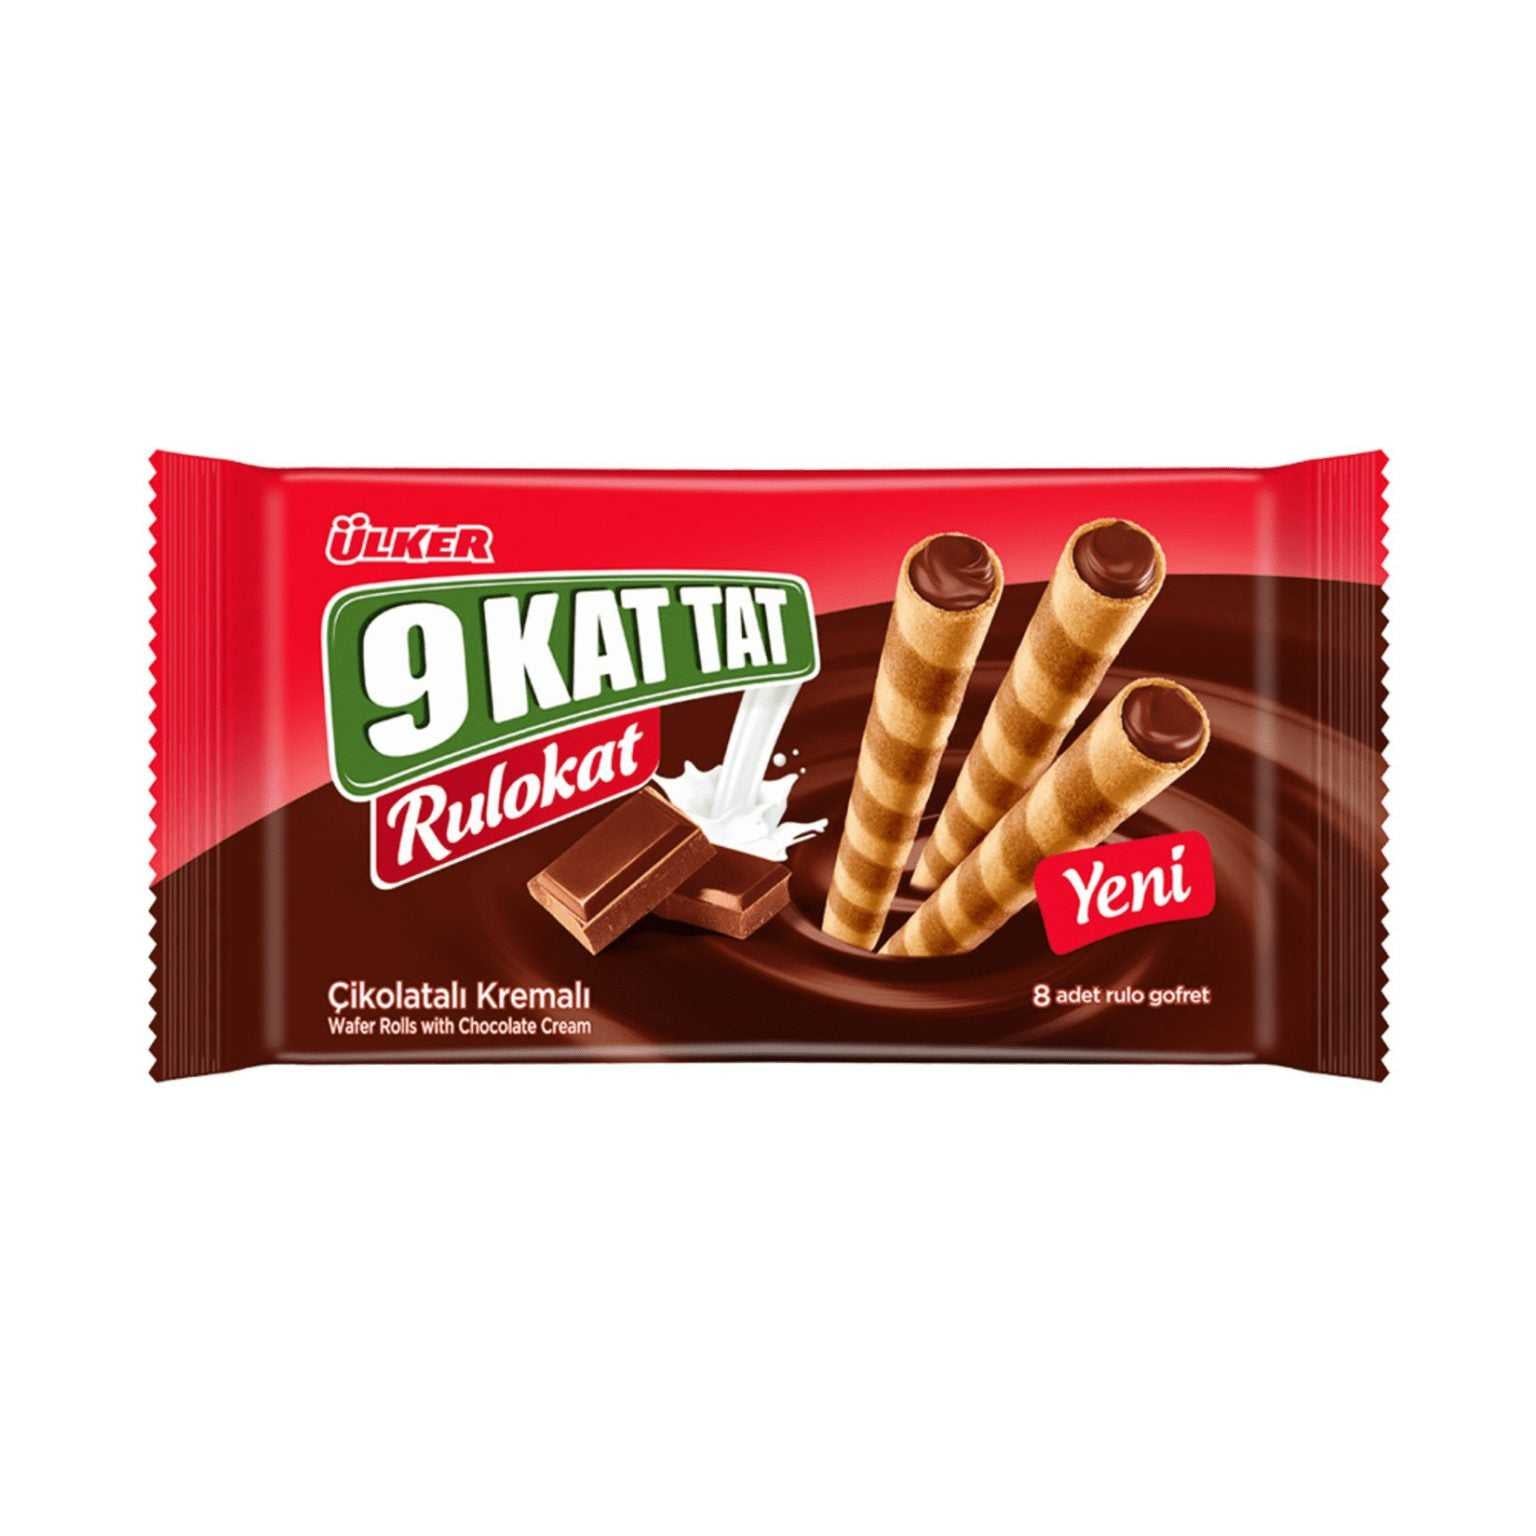 ULKER WAFER ROLLS WITH  CHOCOLATE CREAM